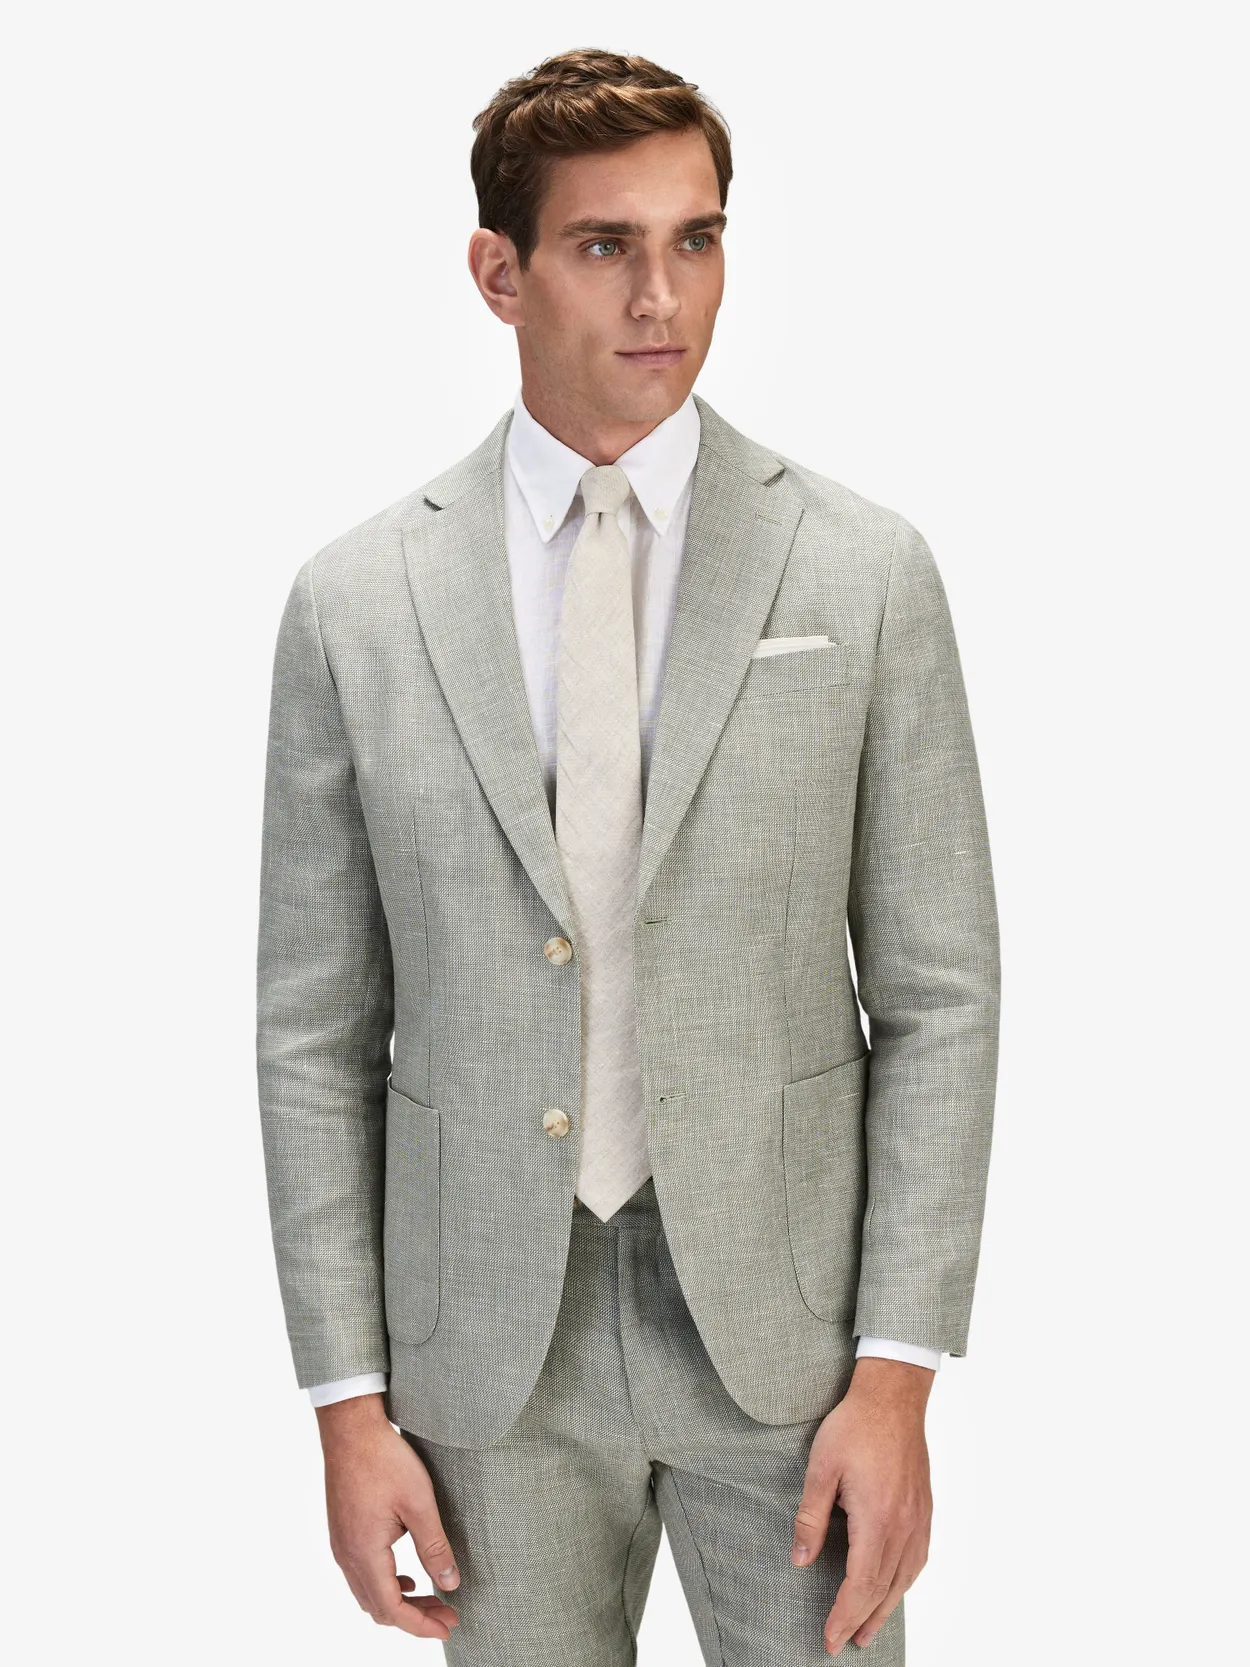 Image number 2 for product Green Linen Suit Santino